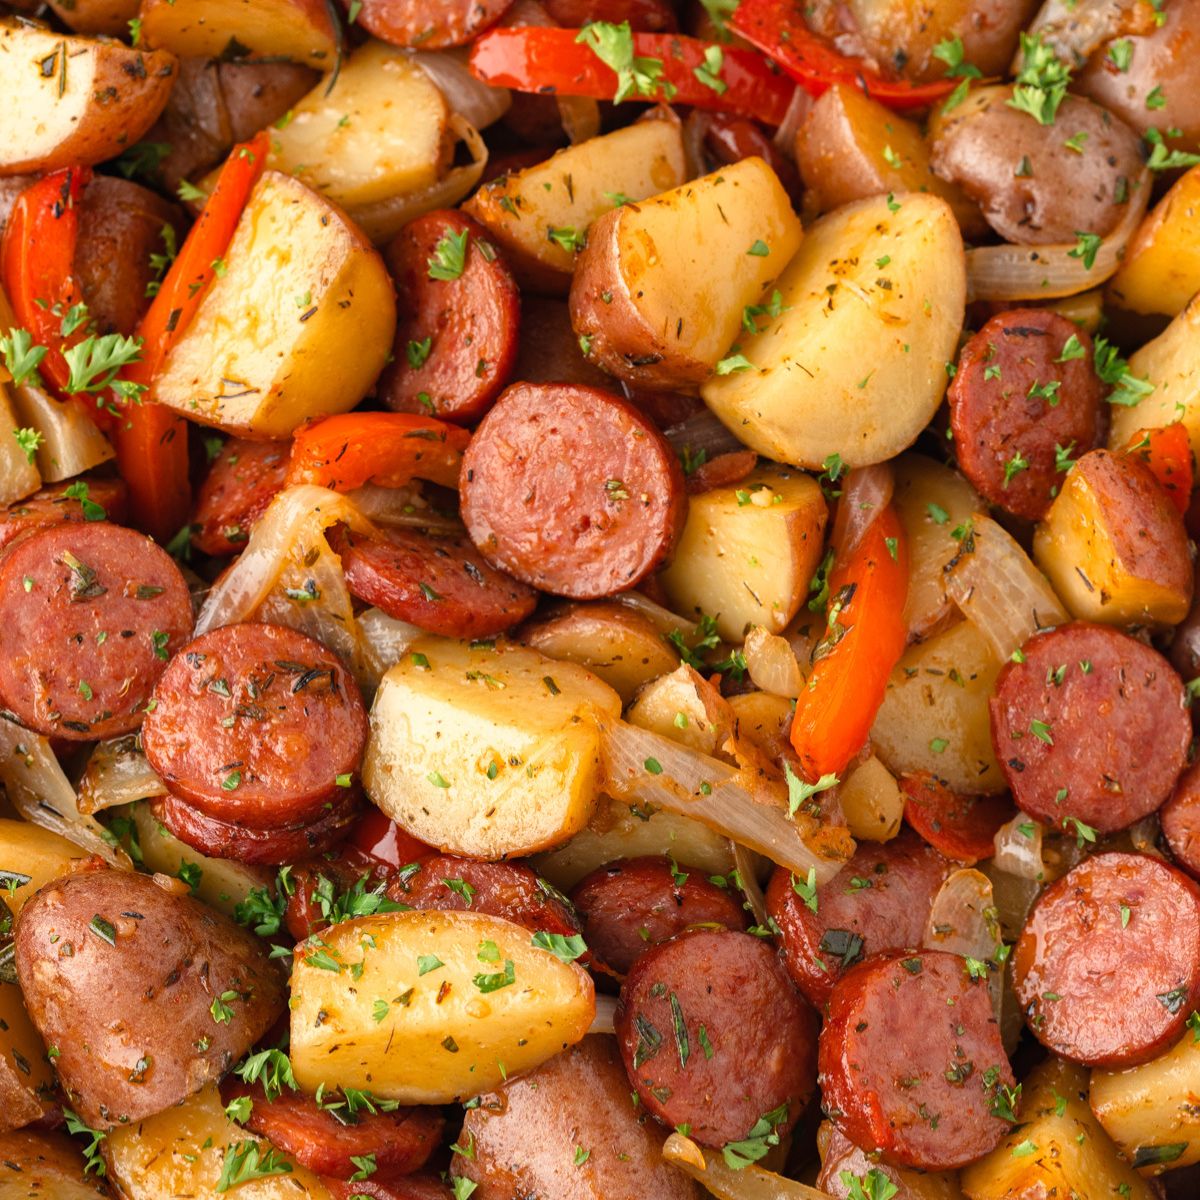 Smoked sausage and potatoes in a cast iron skillet.